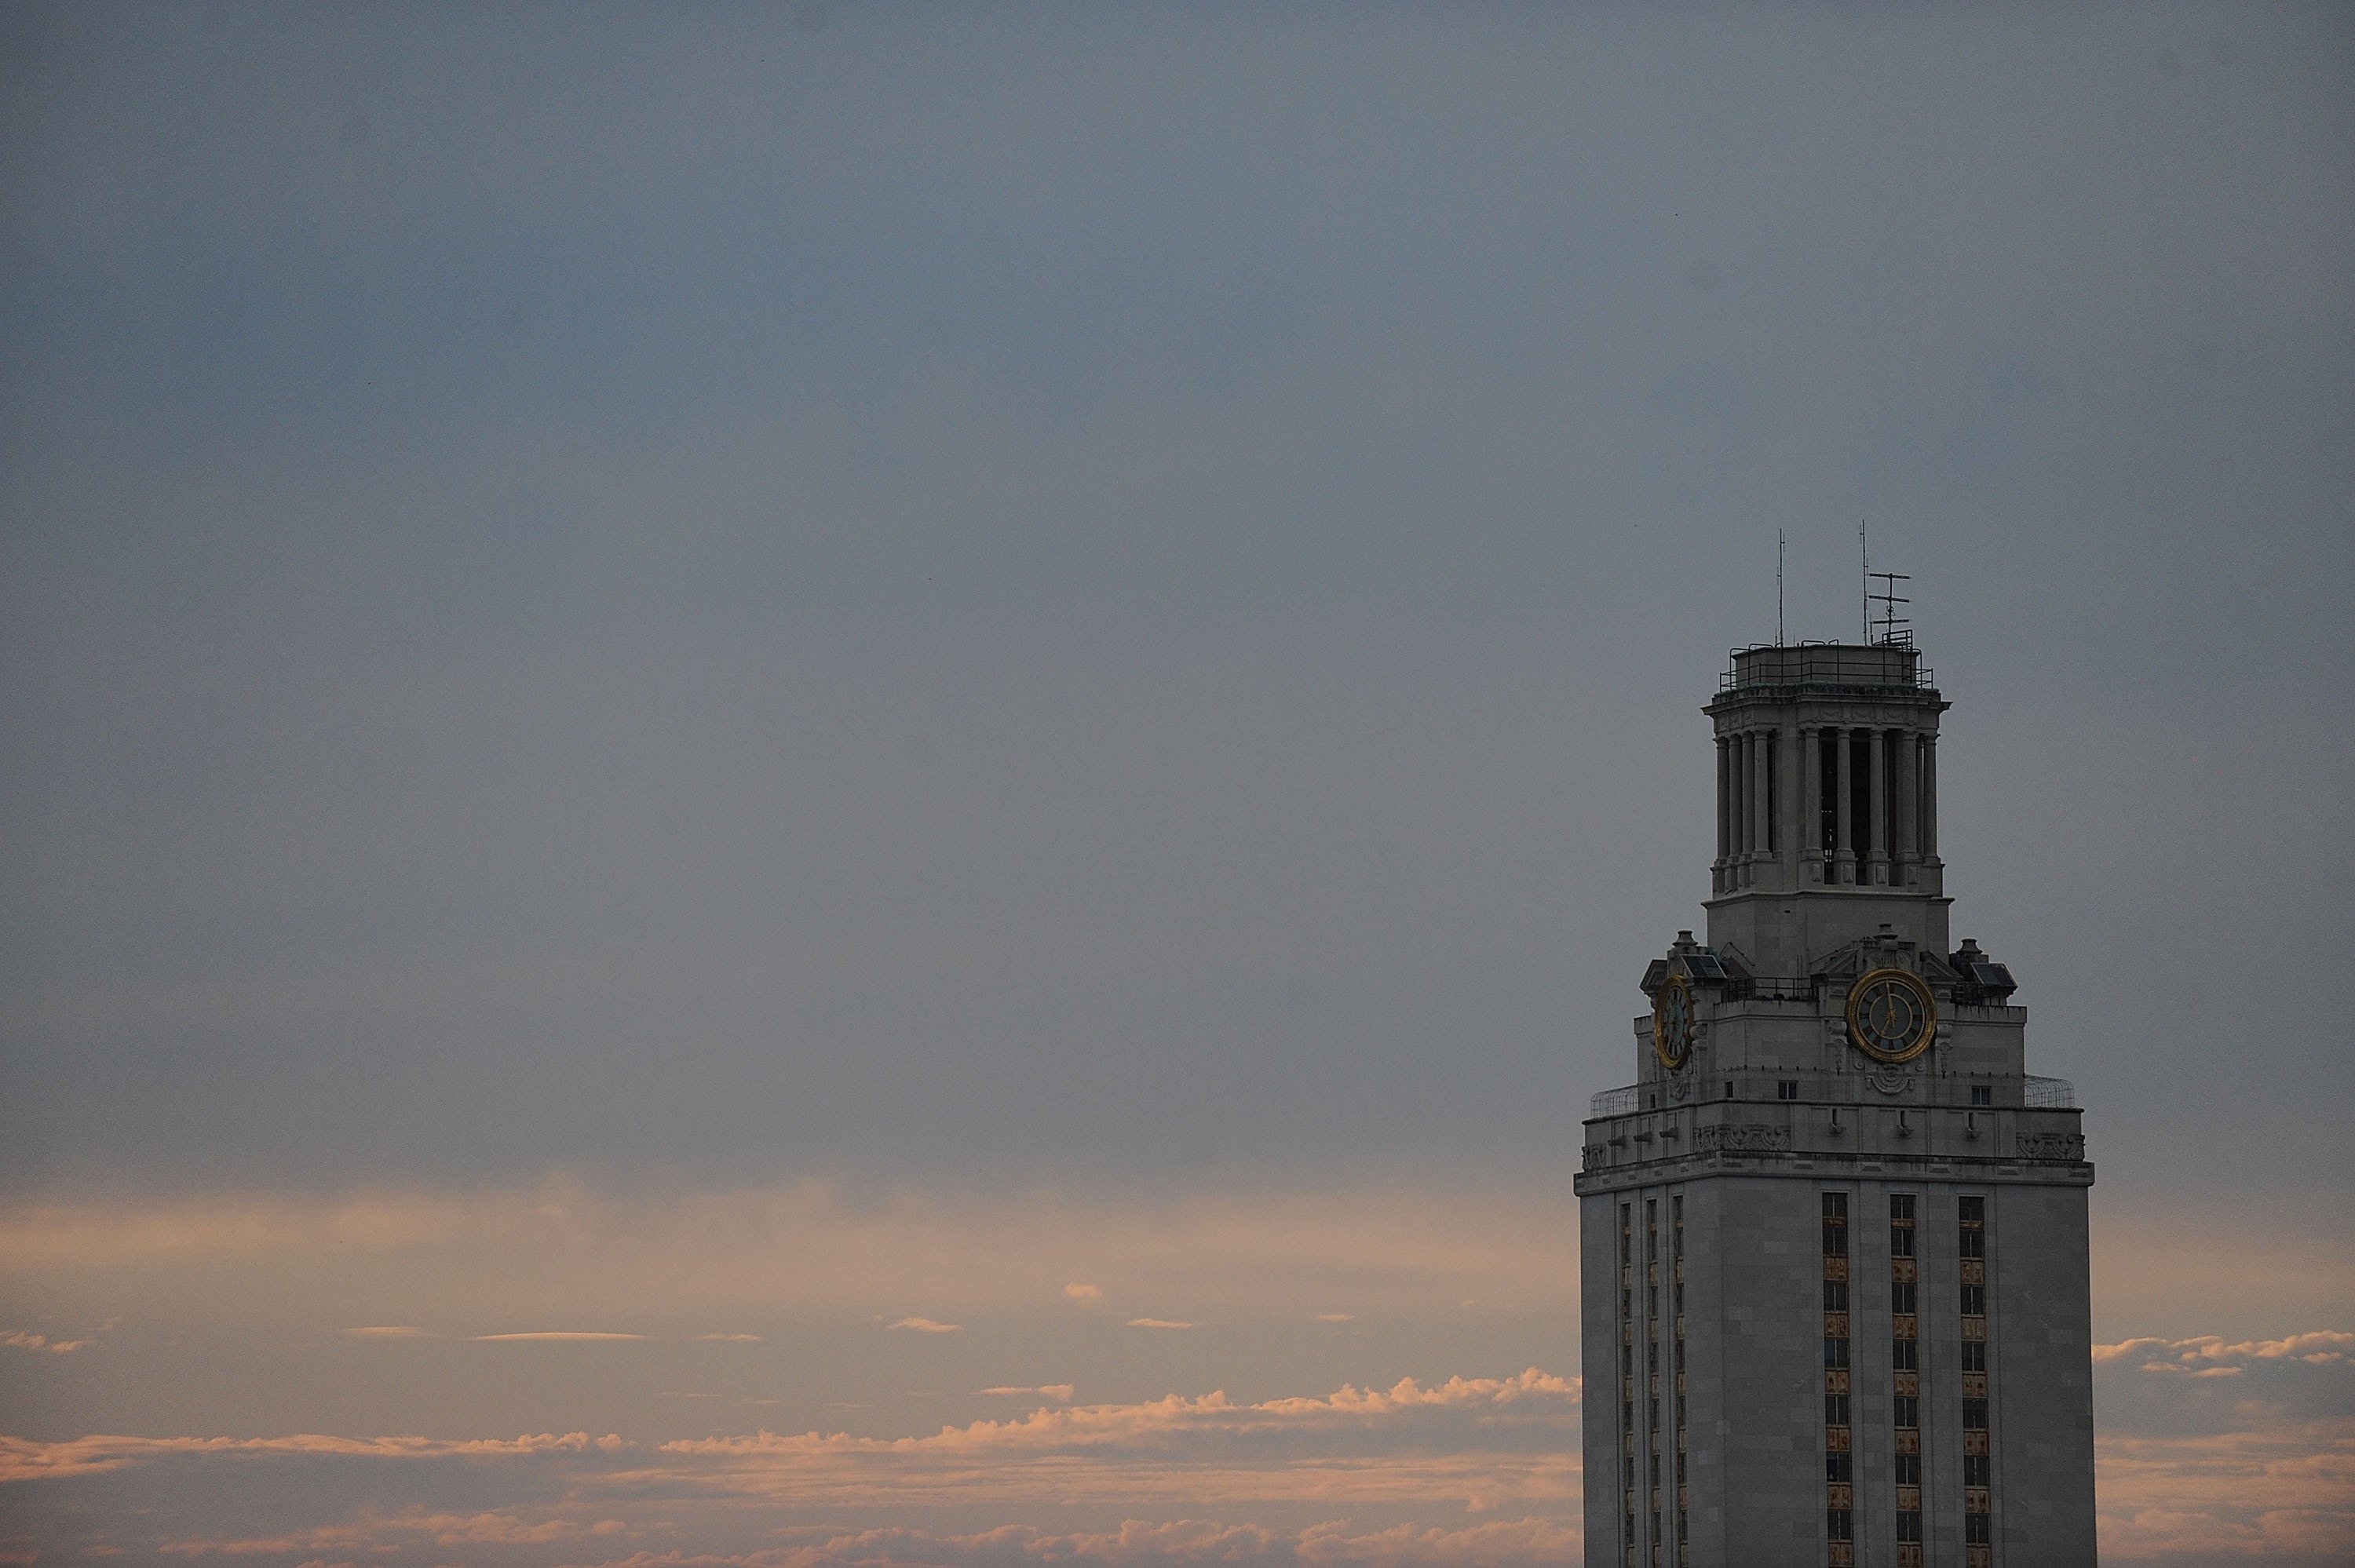 The University of Texas Tower on the University of Texas campus on September 19, 2009 in Austin, Texas. (Photo by Ronald Martinez/Getty Images)